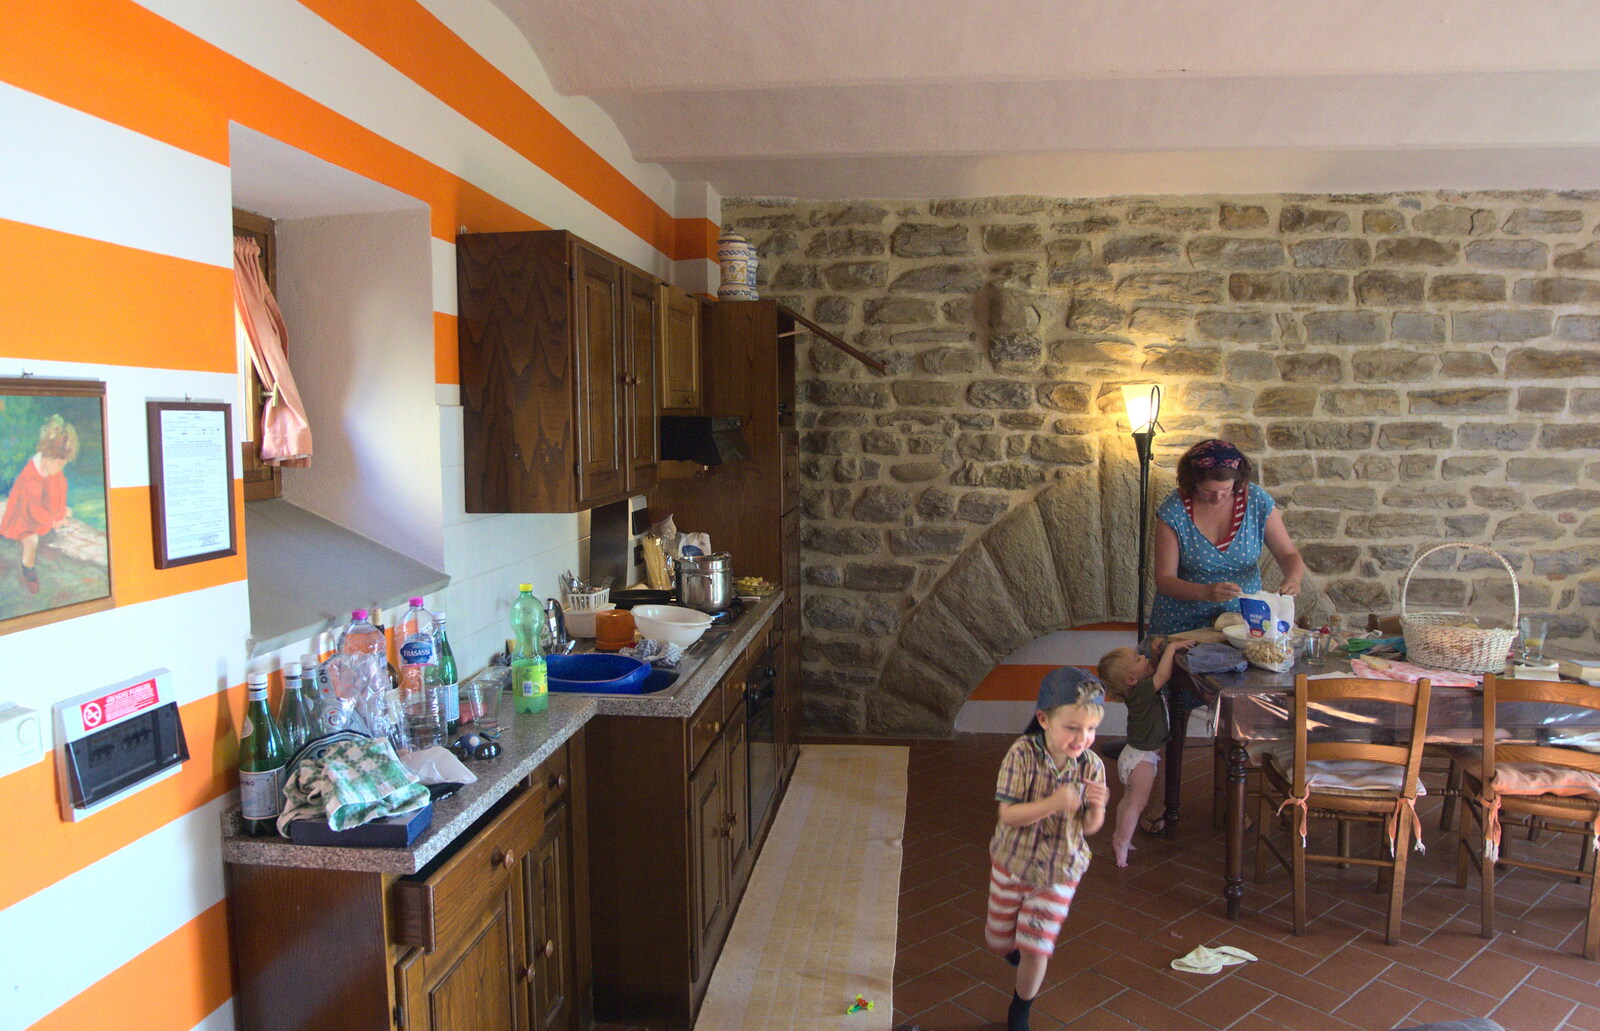 Fred scoots about the kitchen from La Verna Monastery and the Fireflies of Tuscany, Italy - 14th June 2013